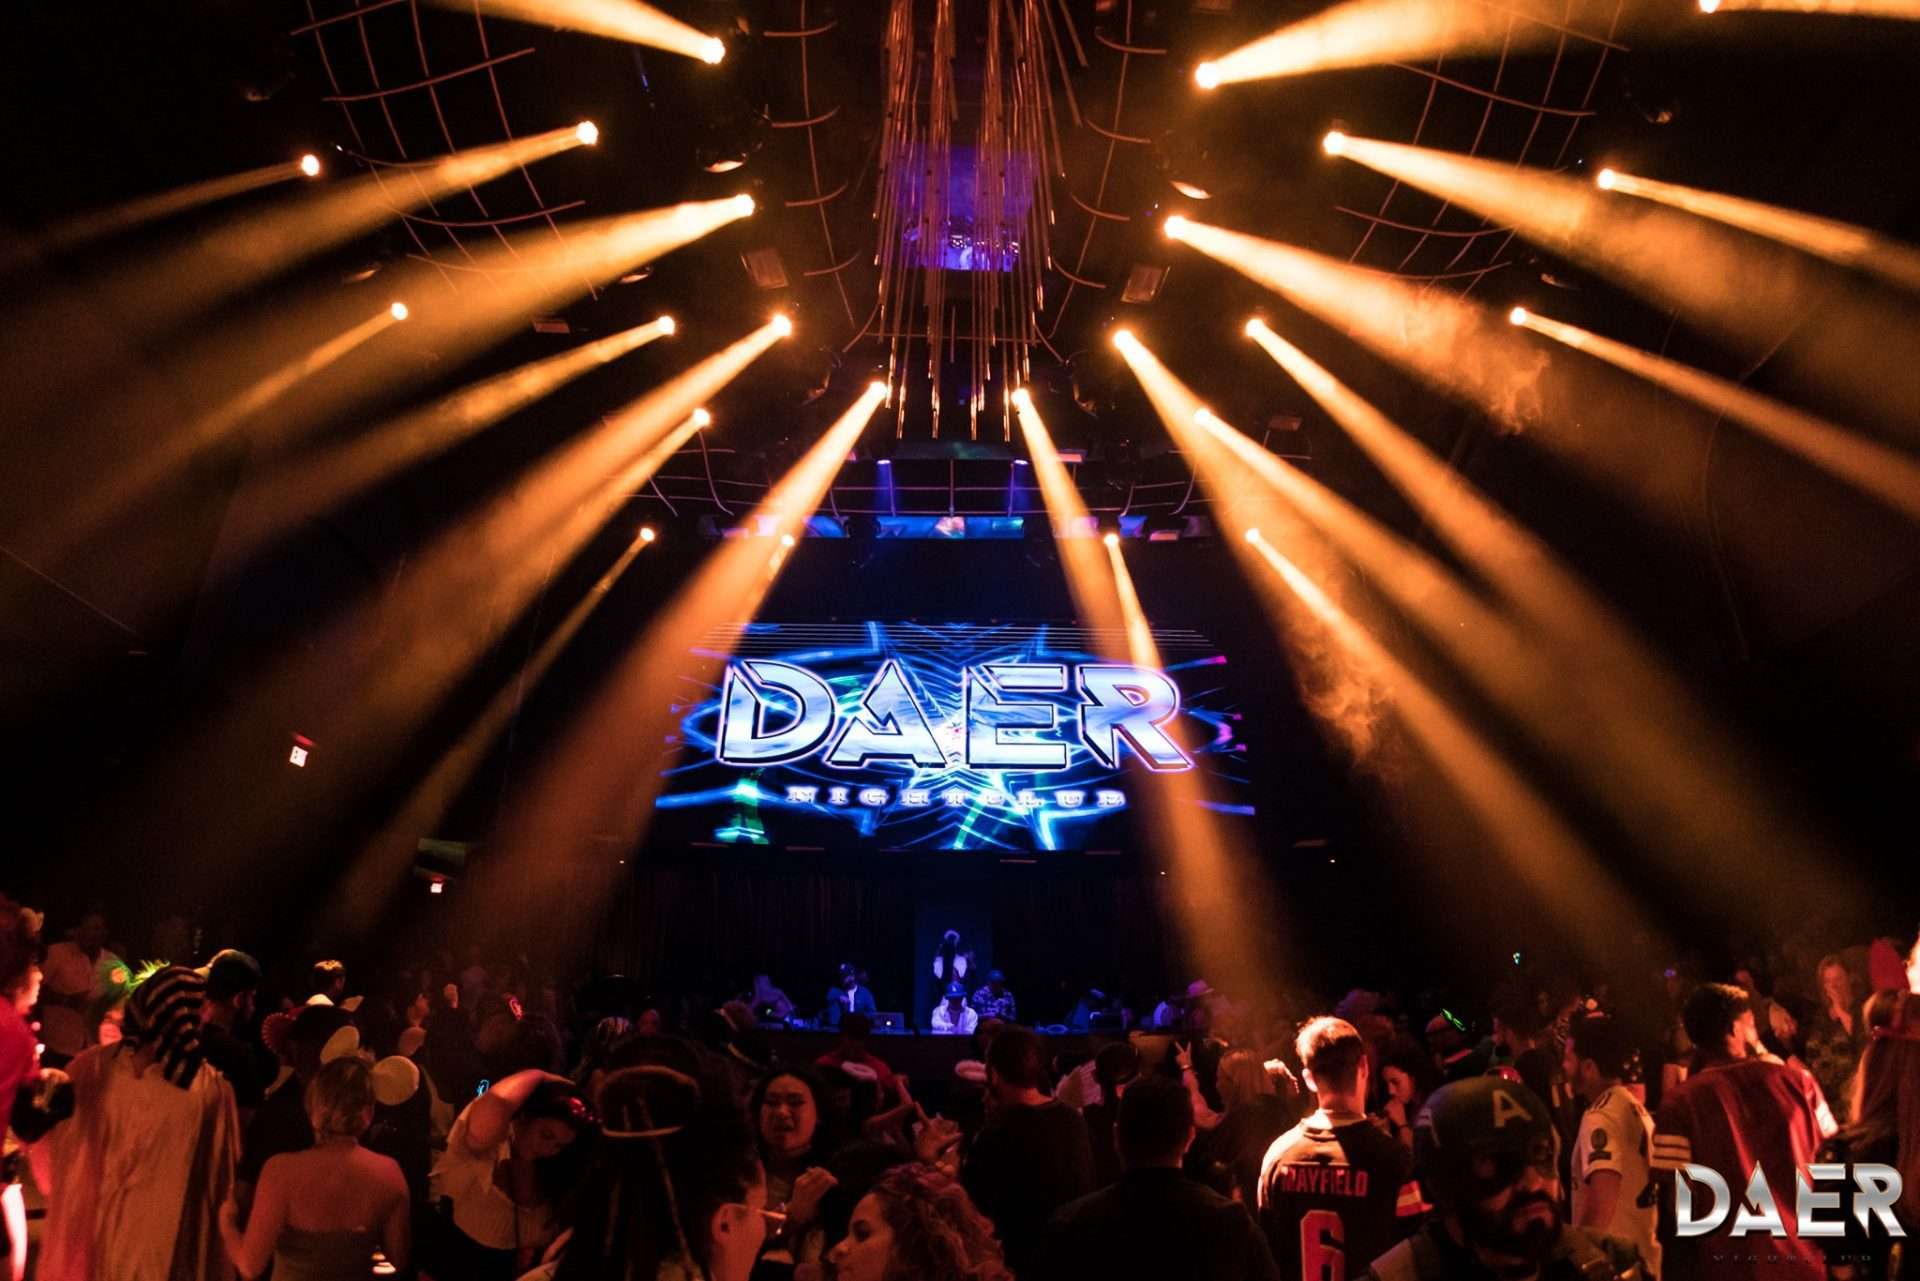 Miami Clubs: The Best Nightclubs for Bottle Service, Dancing, and Great  Music - Thrillist